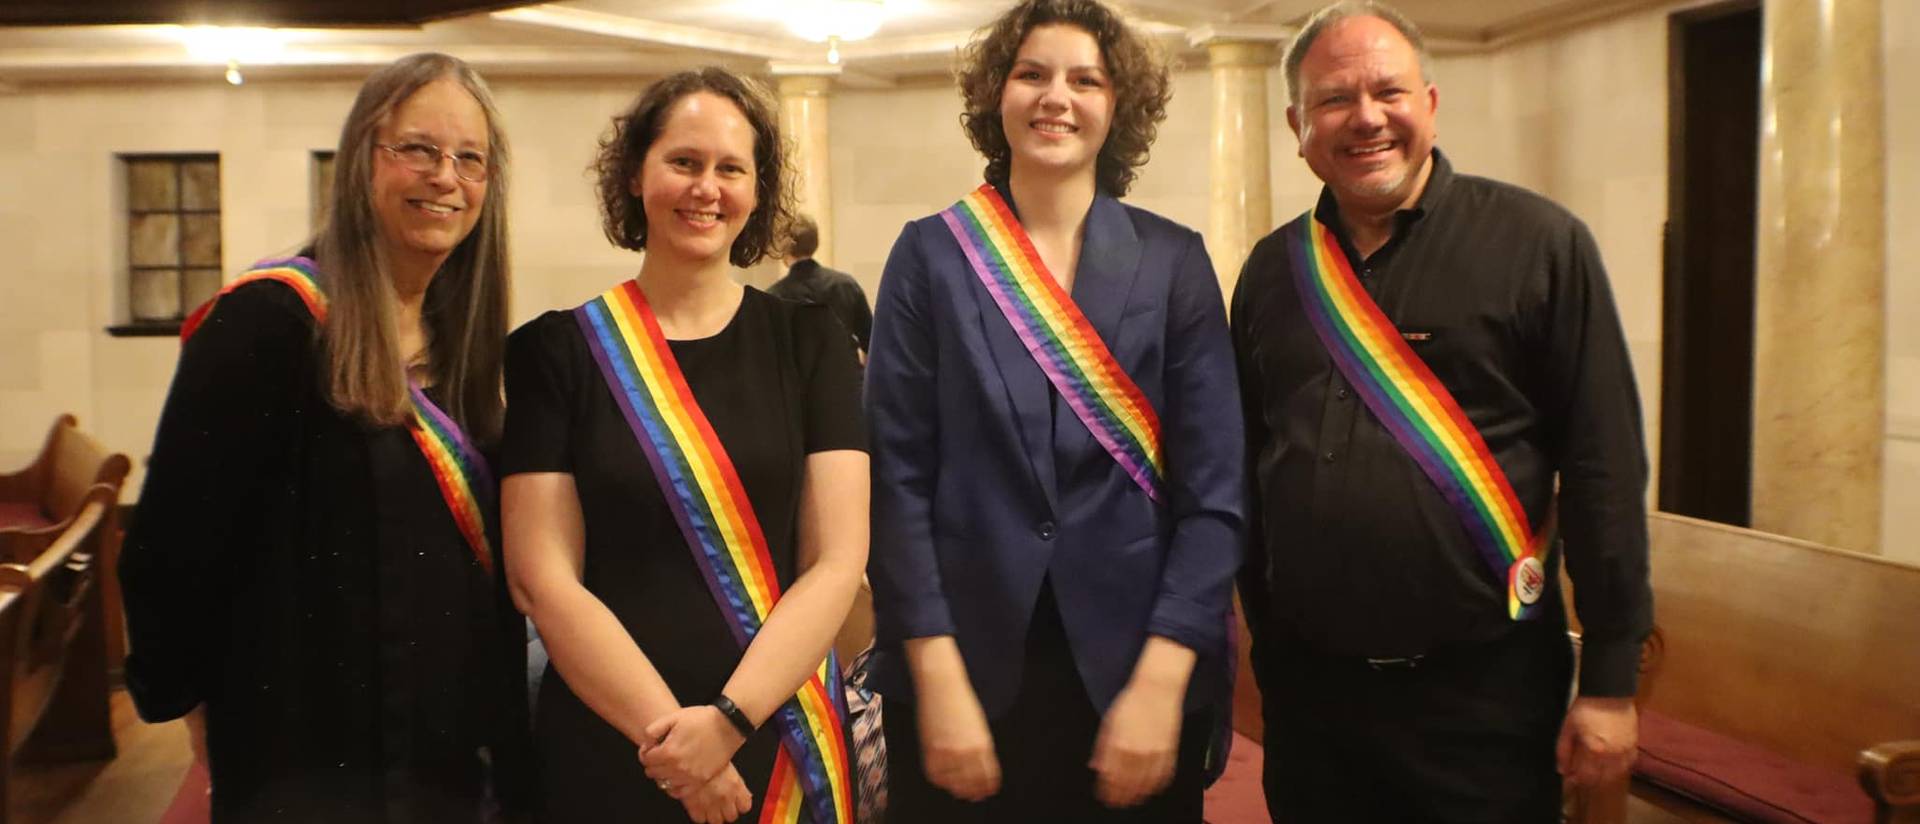 UWEC Student composer Gwenyth Lark and the directors of the Atlanta Freedom Bands